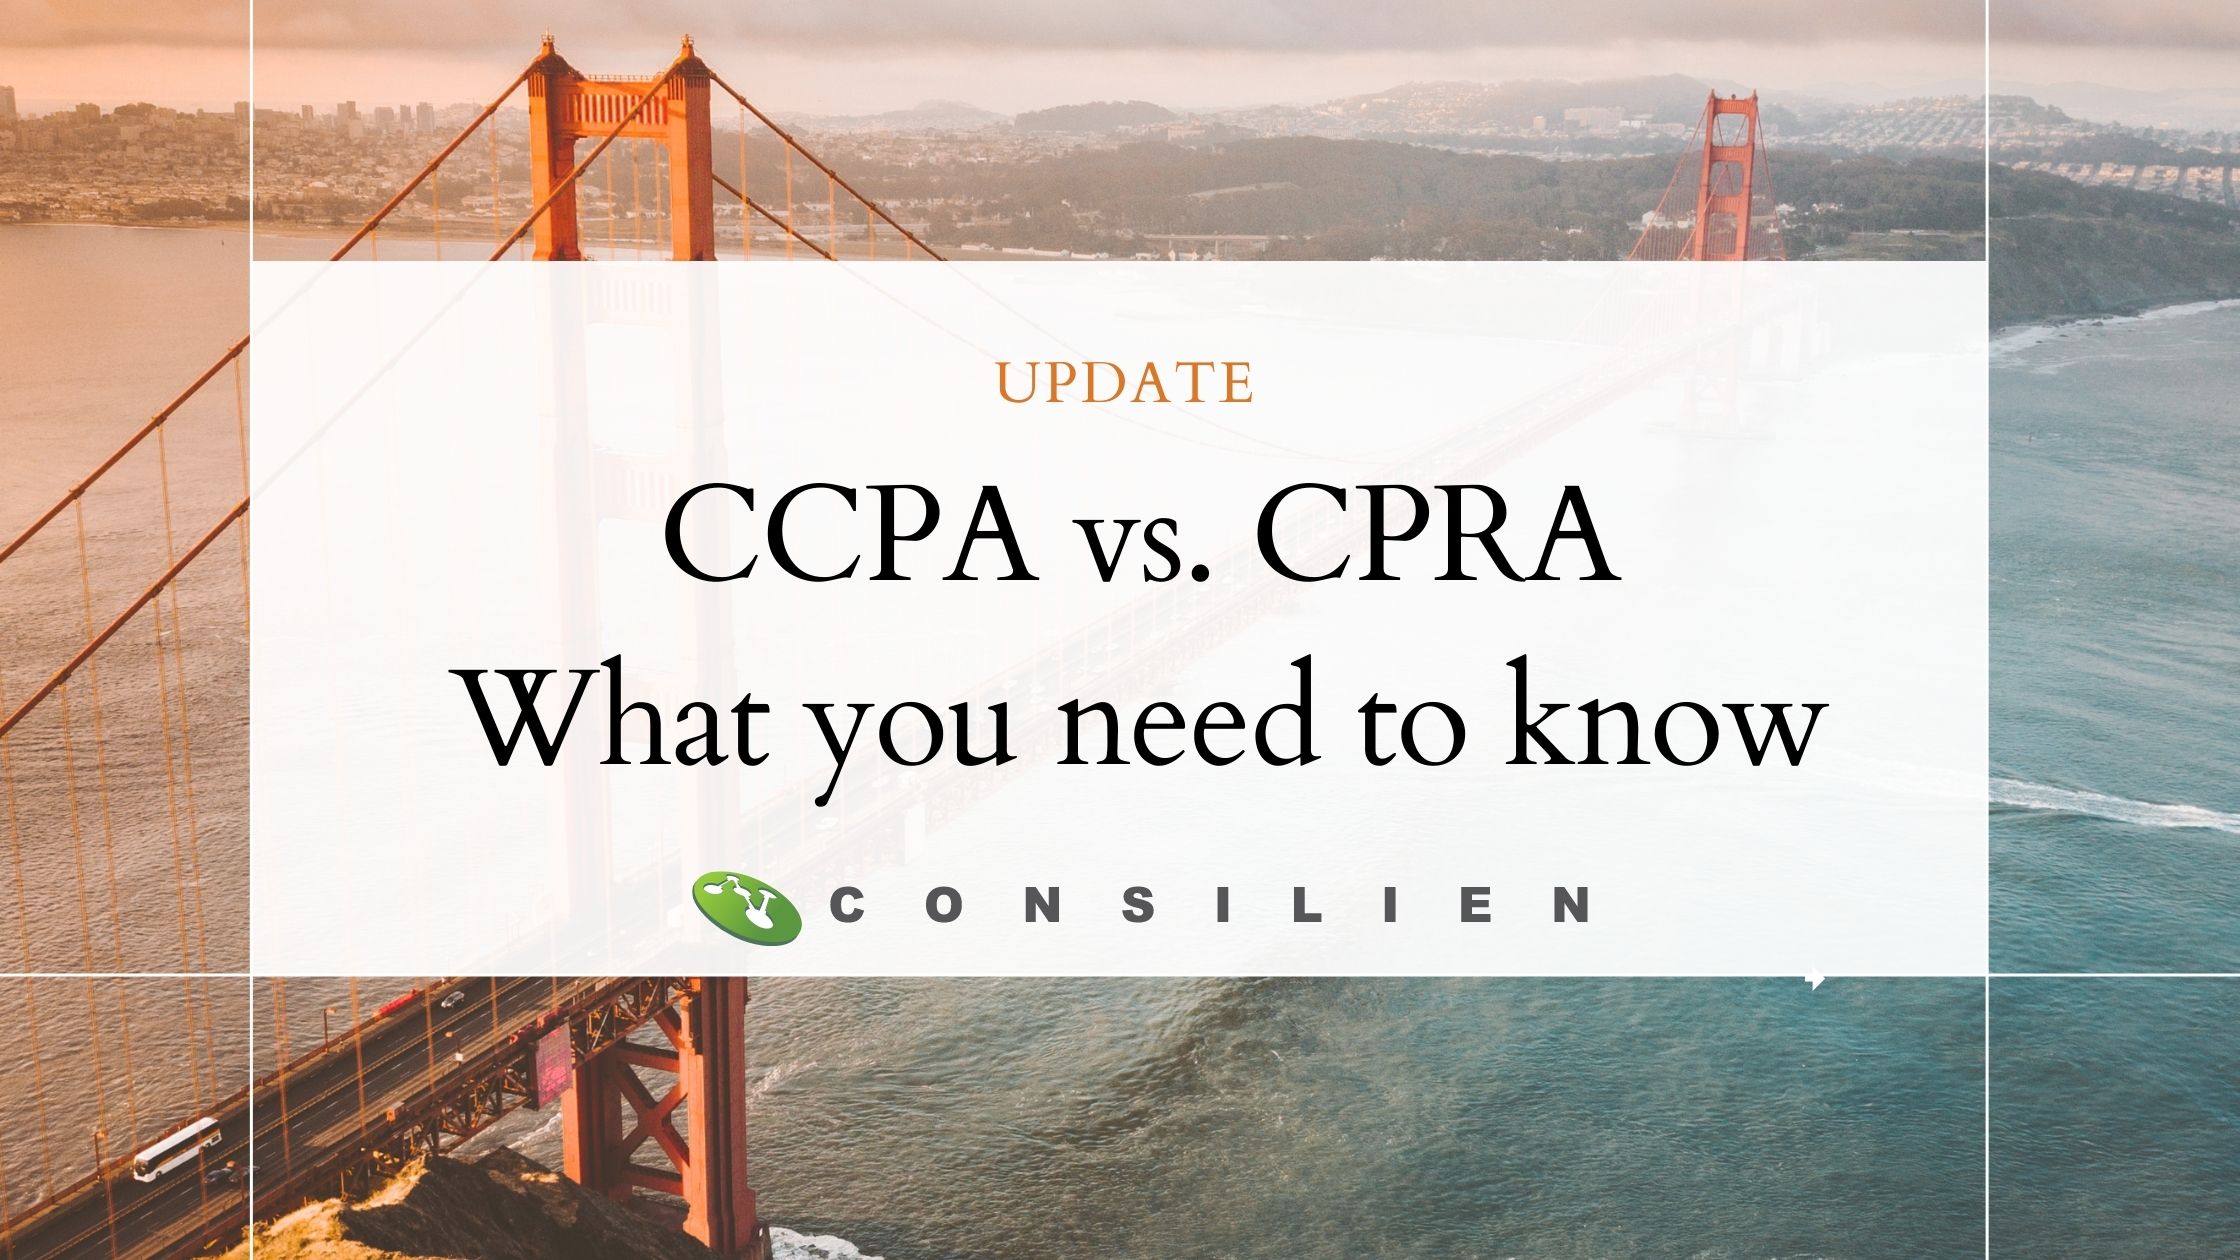 CCPA vs. CPRA. What You Need to Know Now.